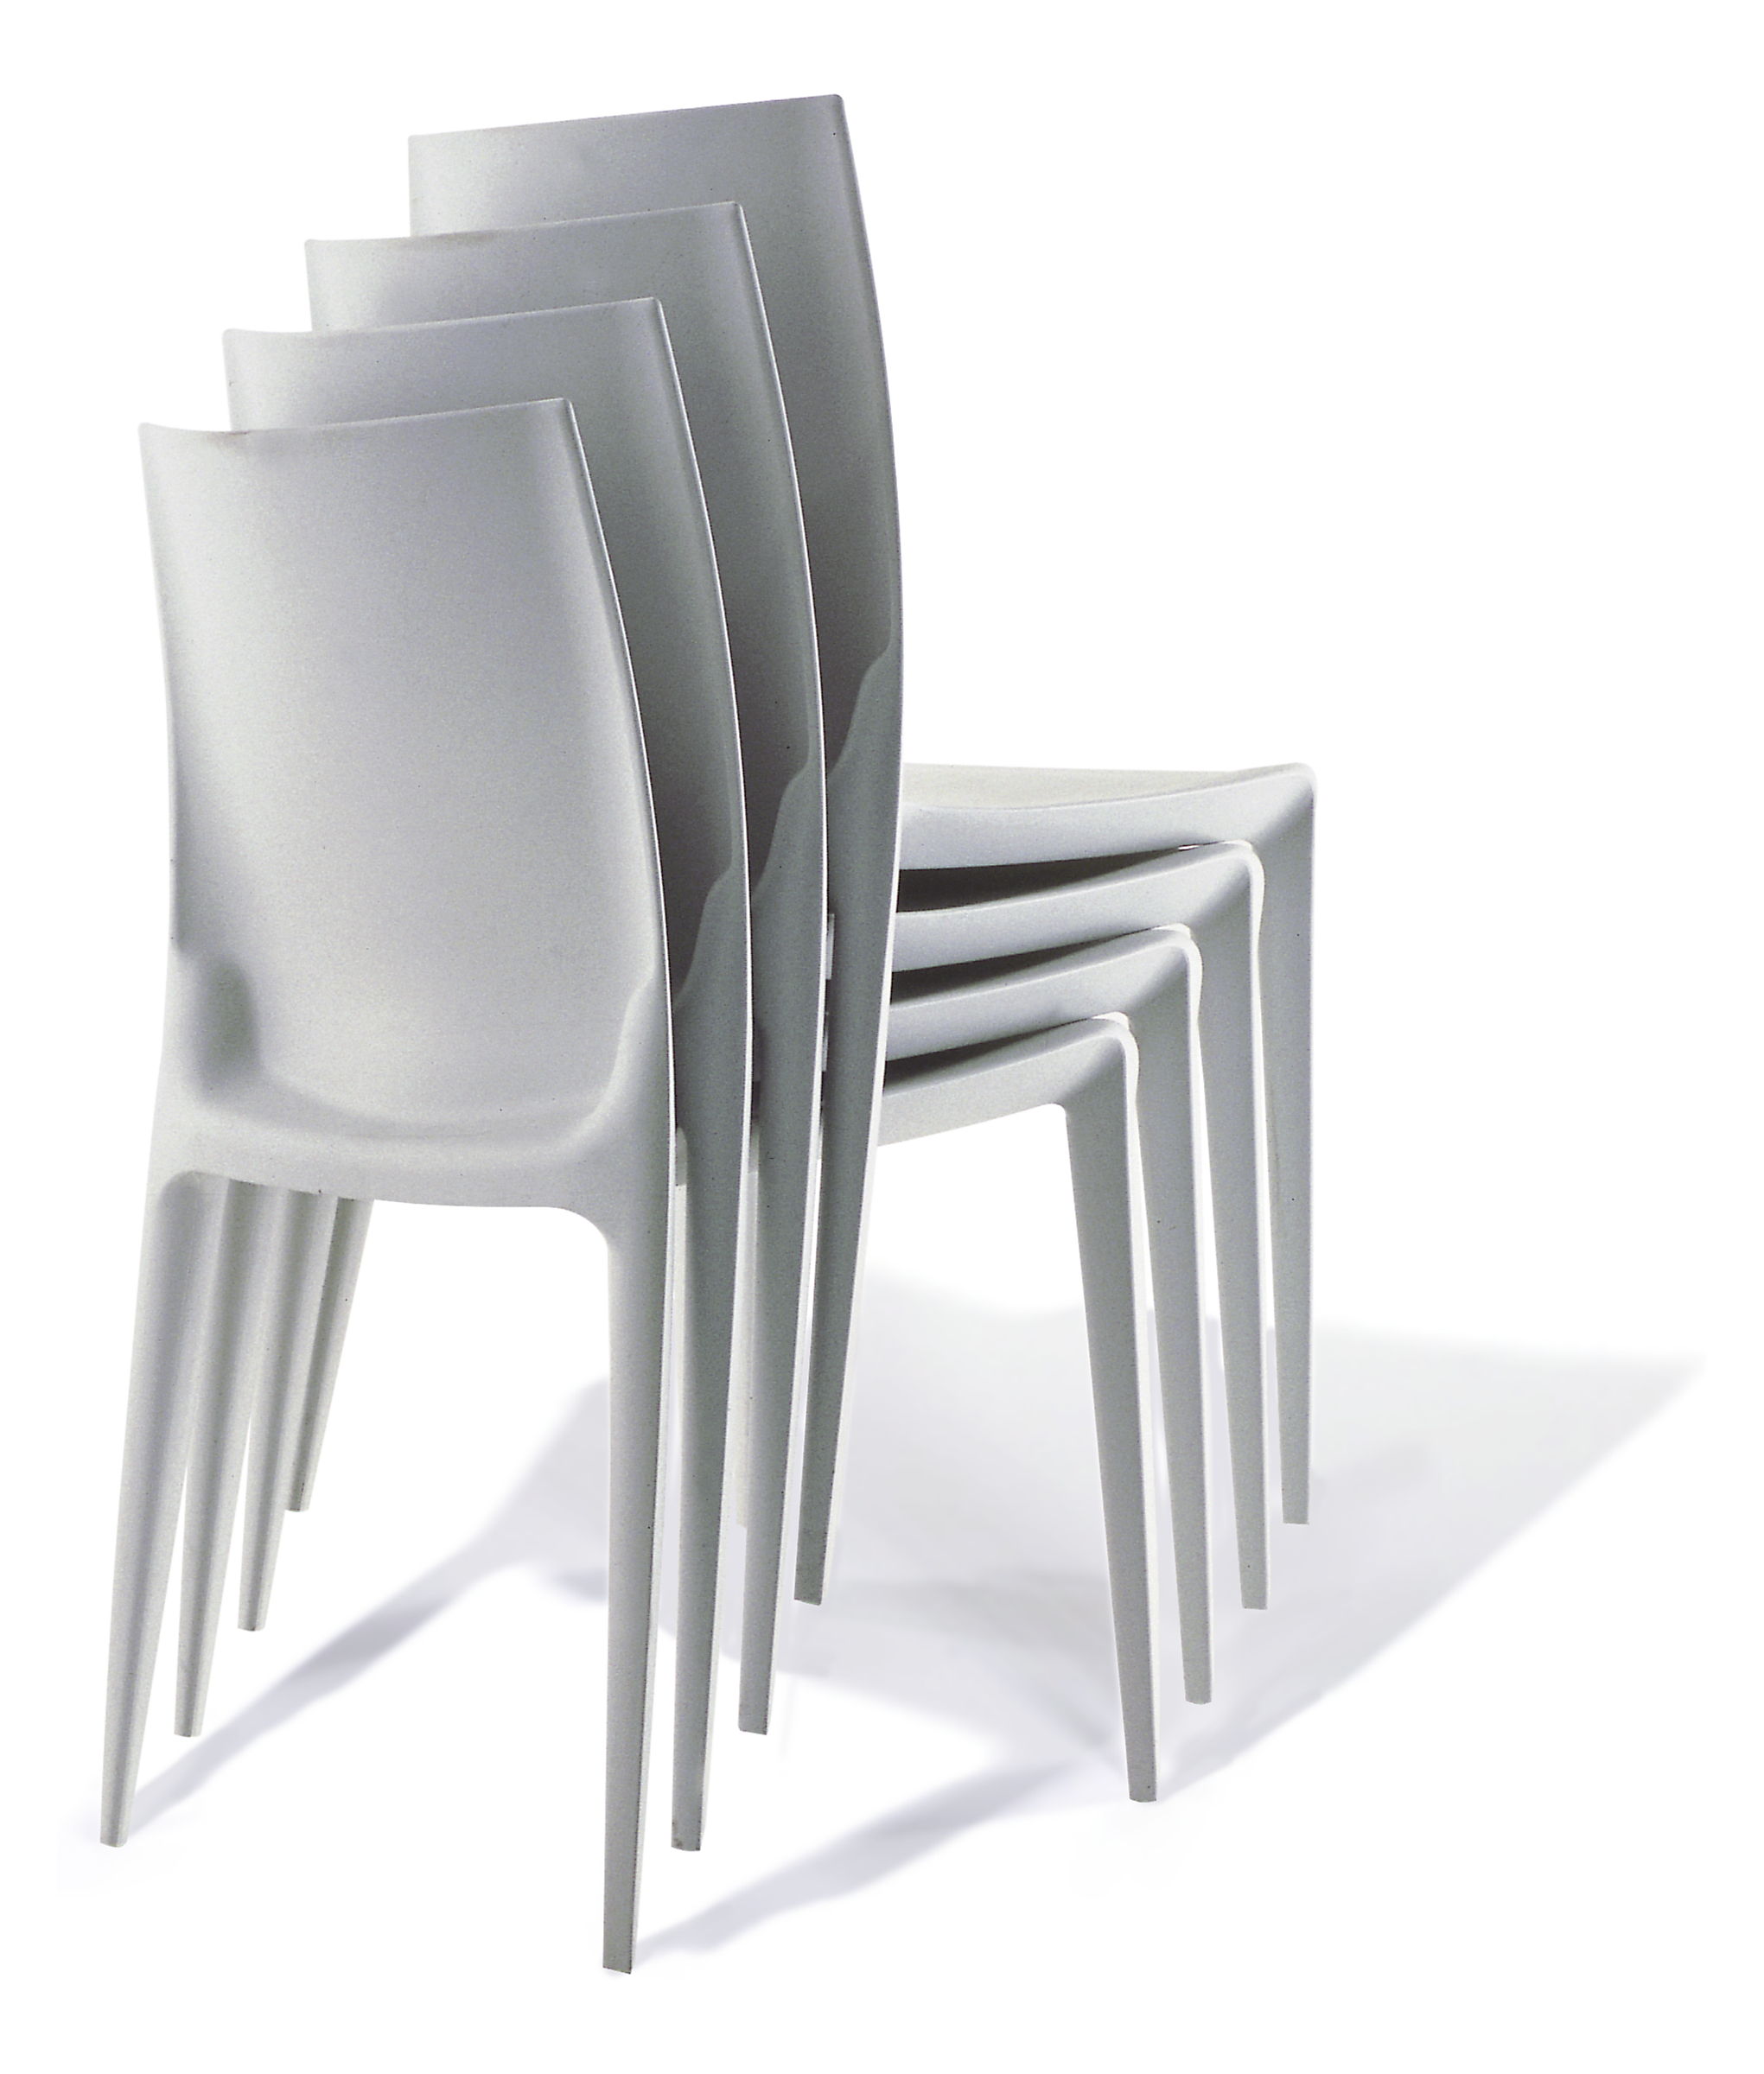 Back view of The Bellini Chair in Light Grey.